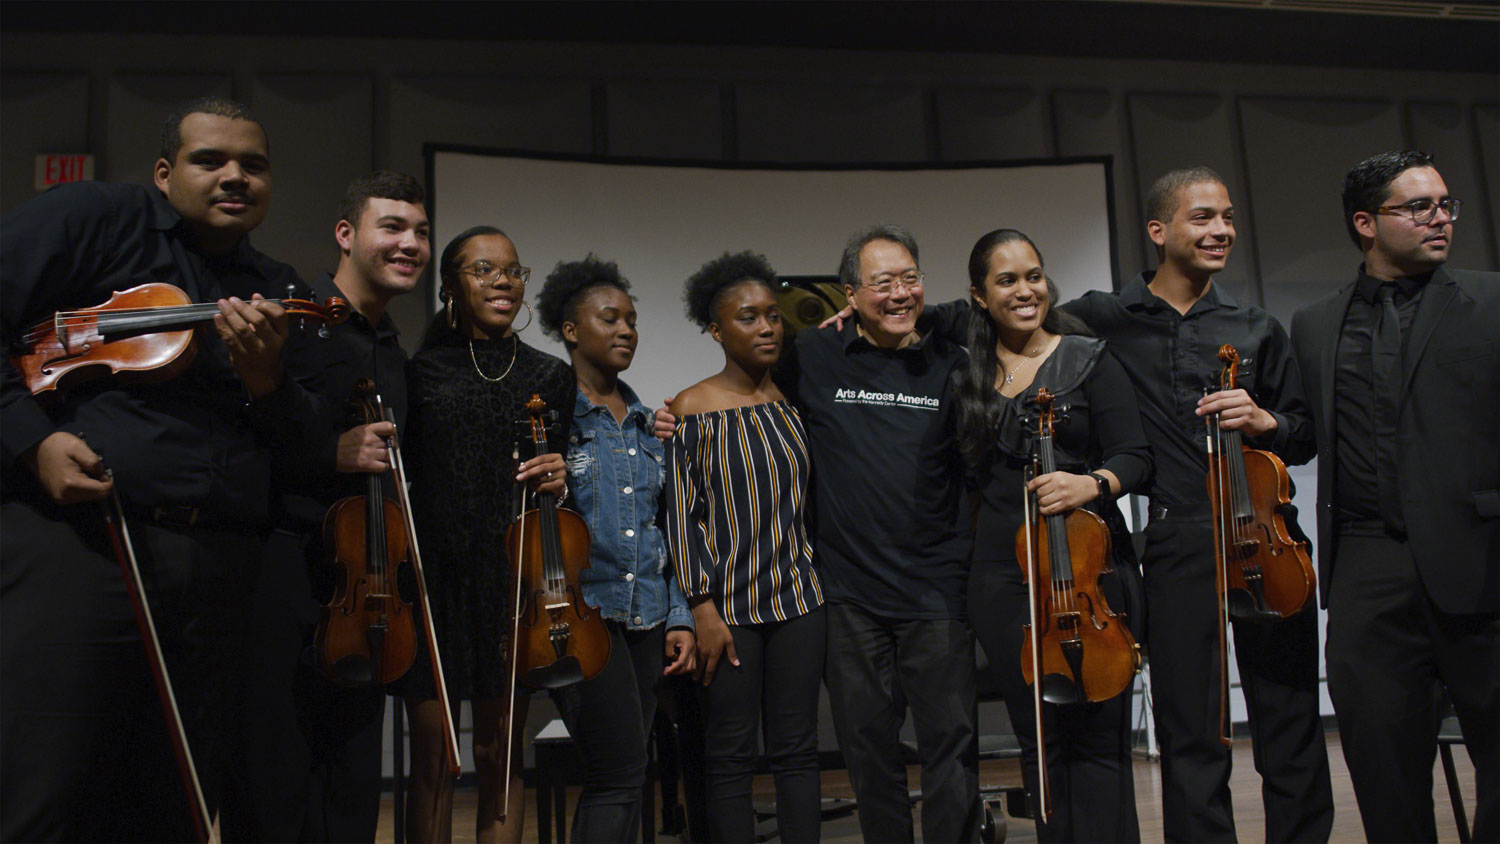 The Kennedy Center Man posing with a student band with many holding violins